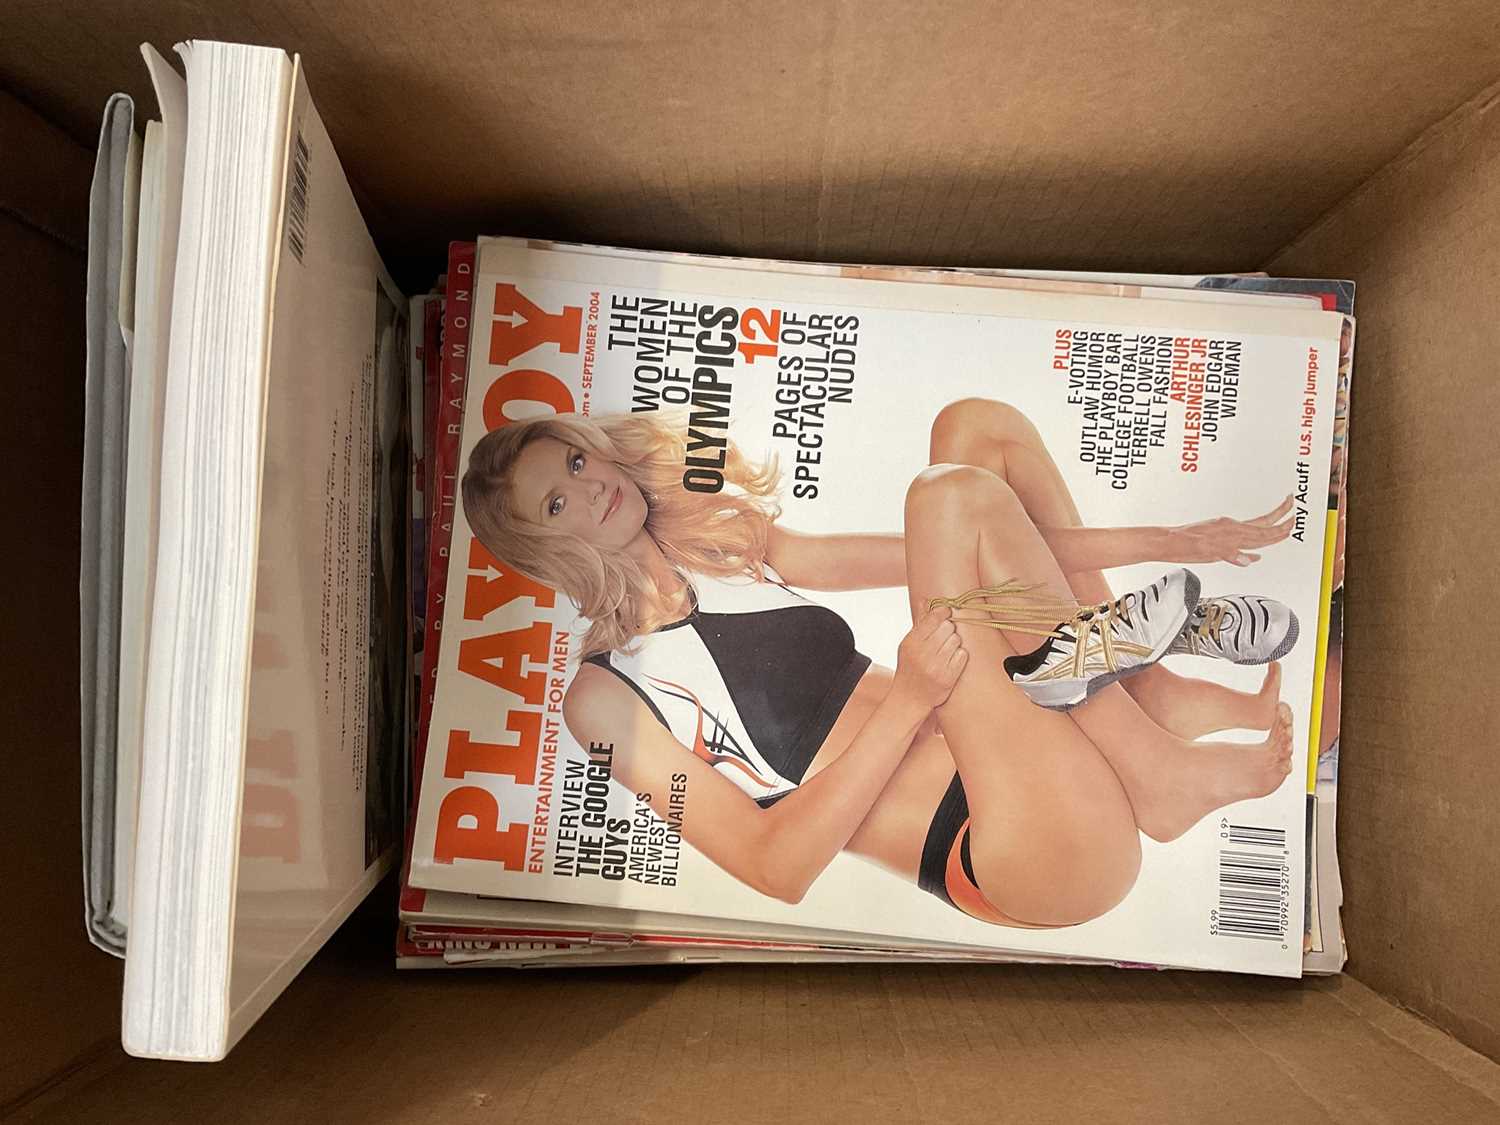 Two boxes containing Playboy magazines, FHM and similar